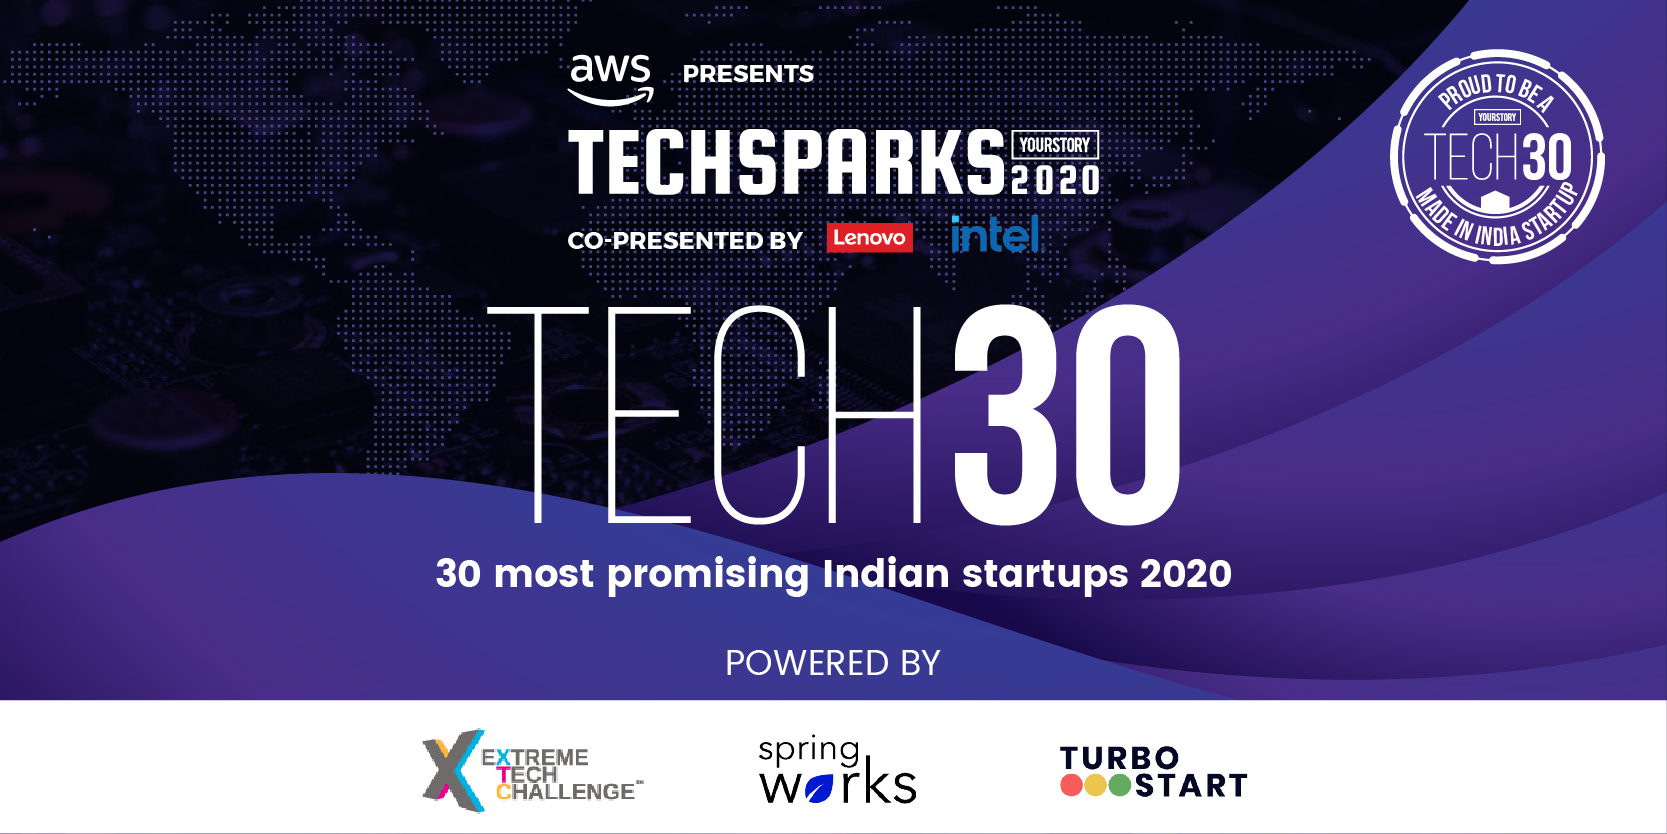 [TechSparks 2020] Unveiling Tech30: YourStory’s list of high-potential tech startups in India